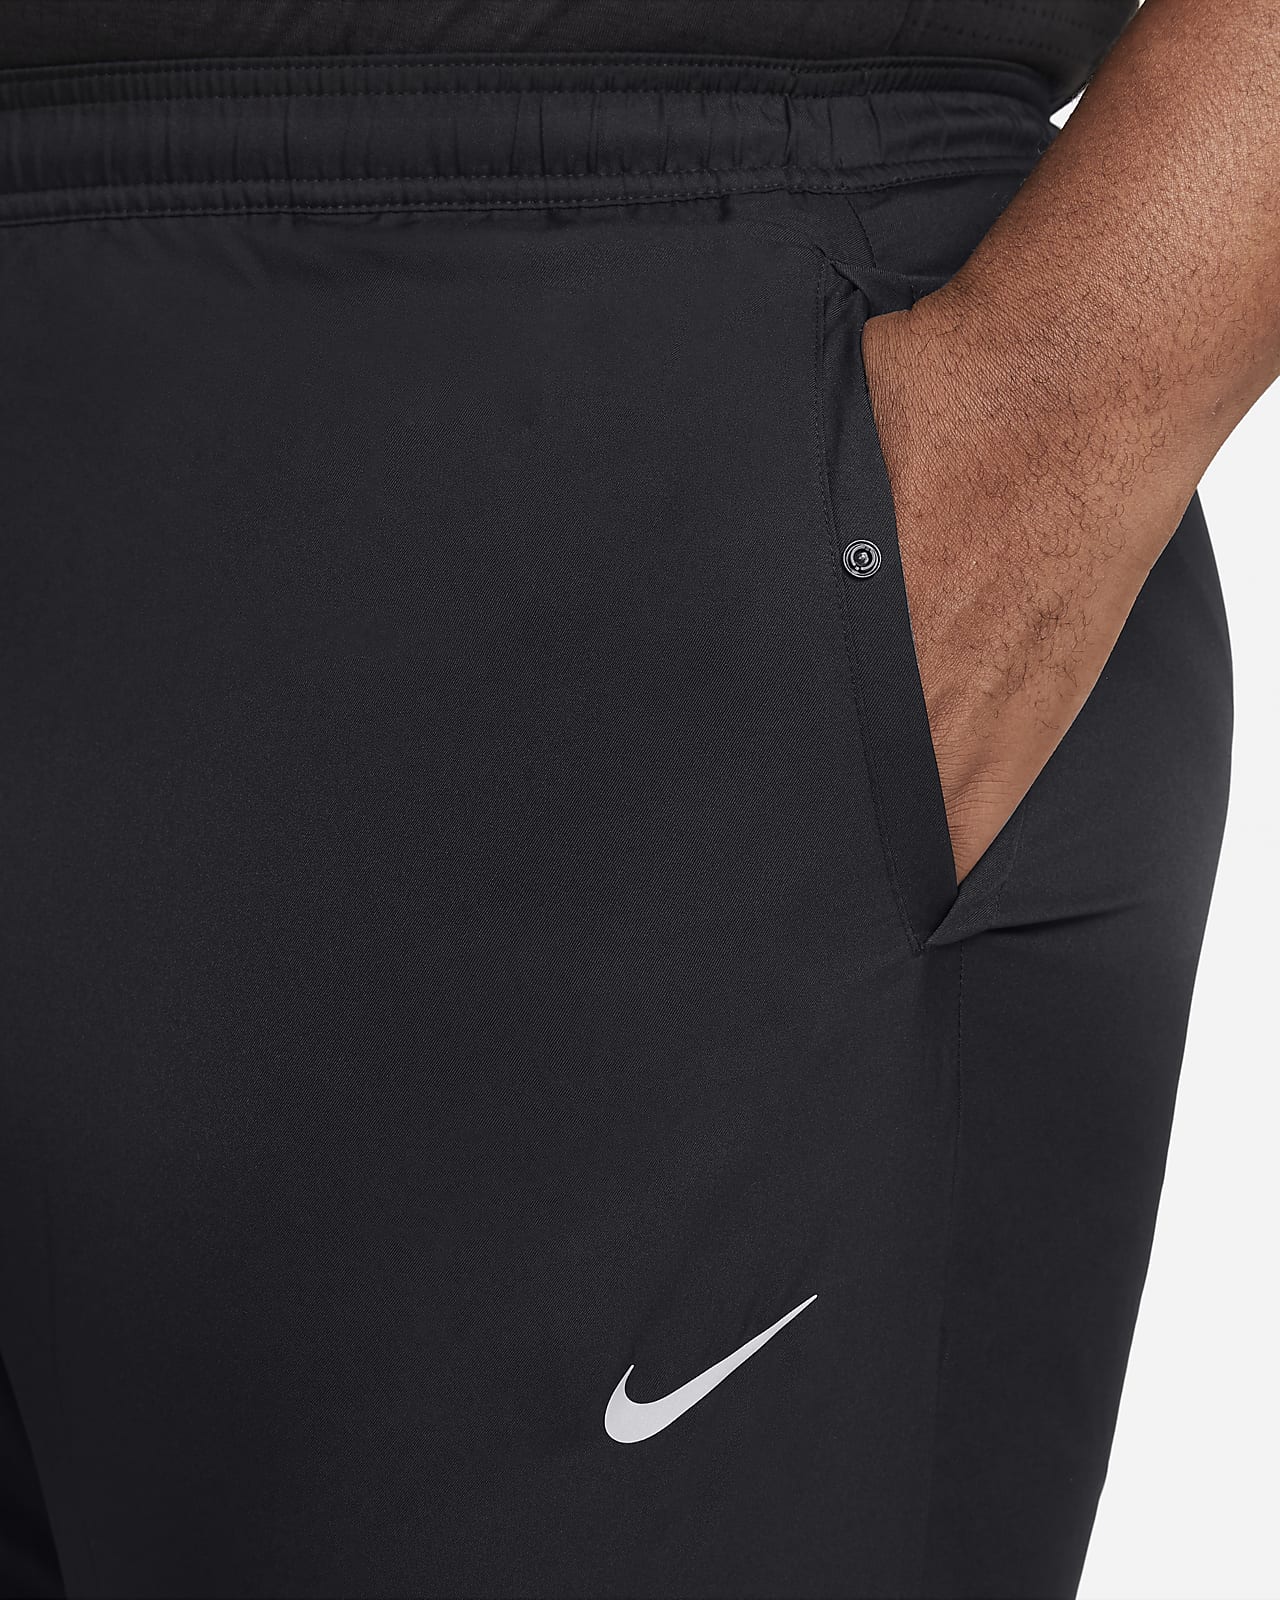 nike woven running trousers